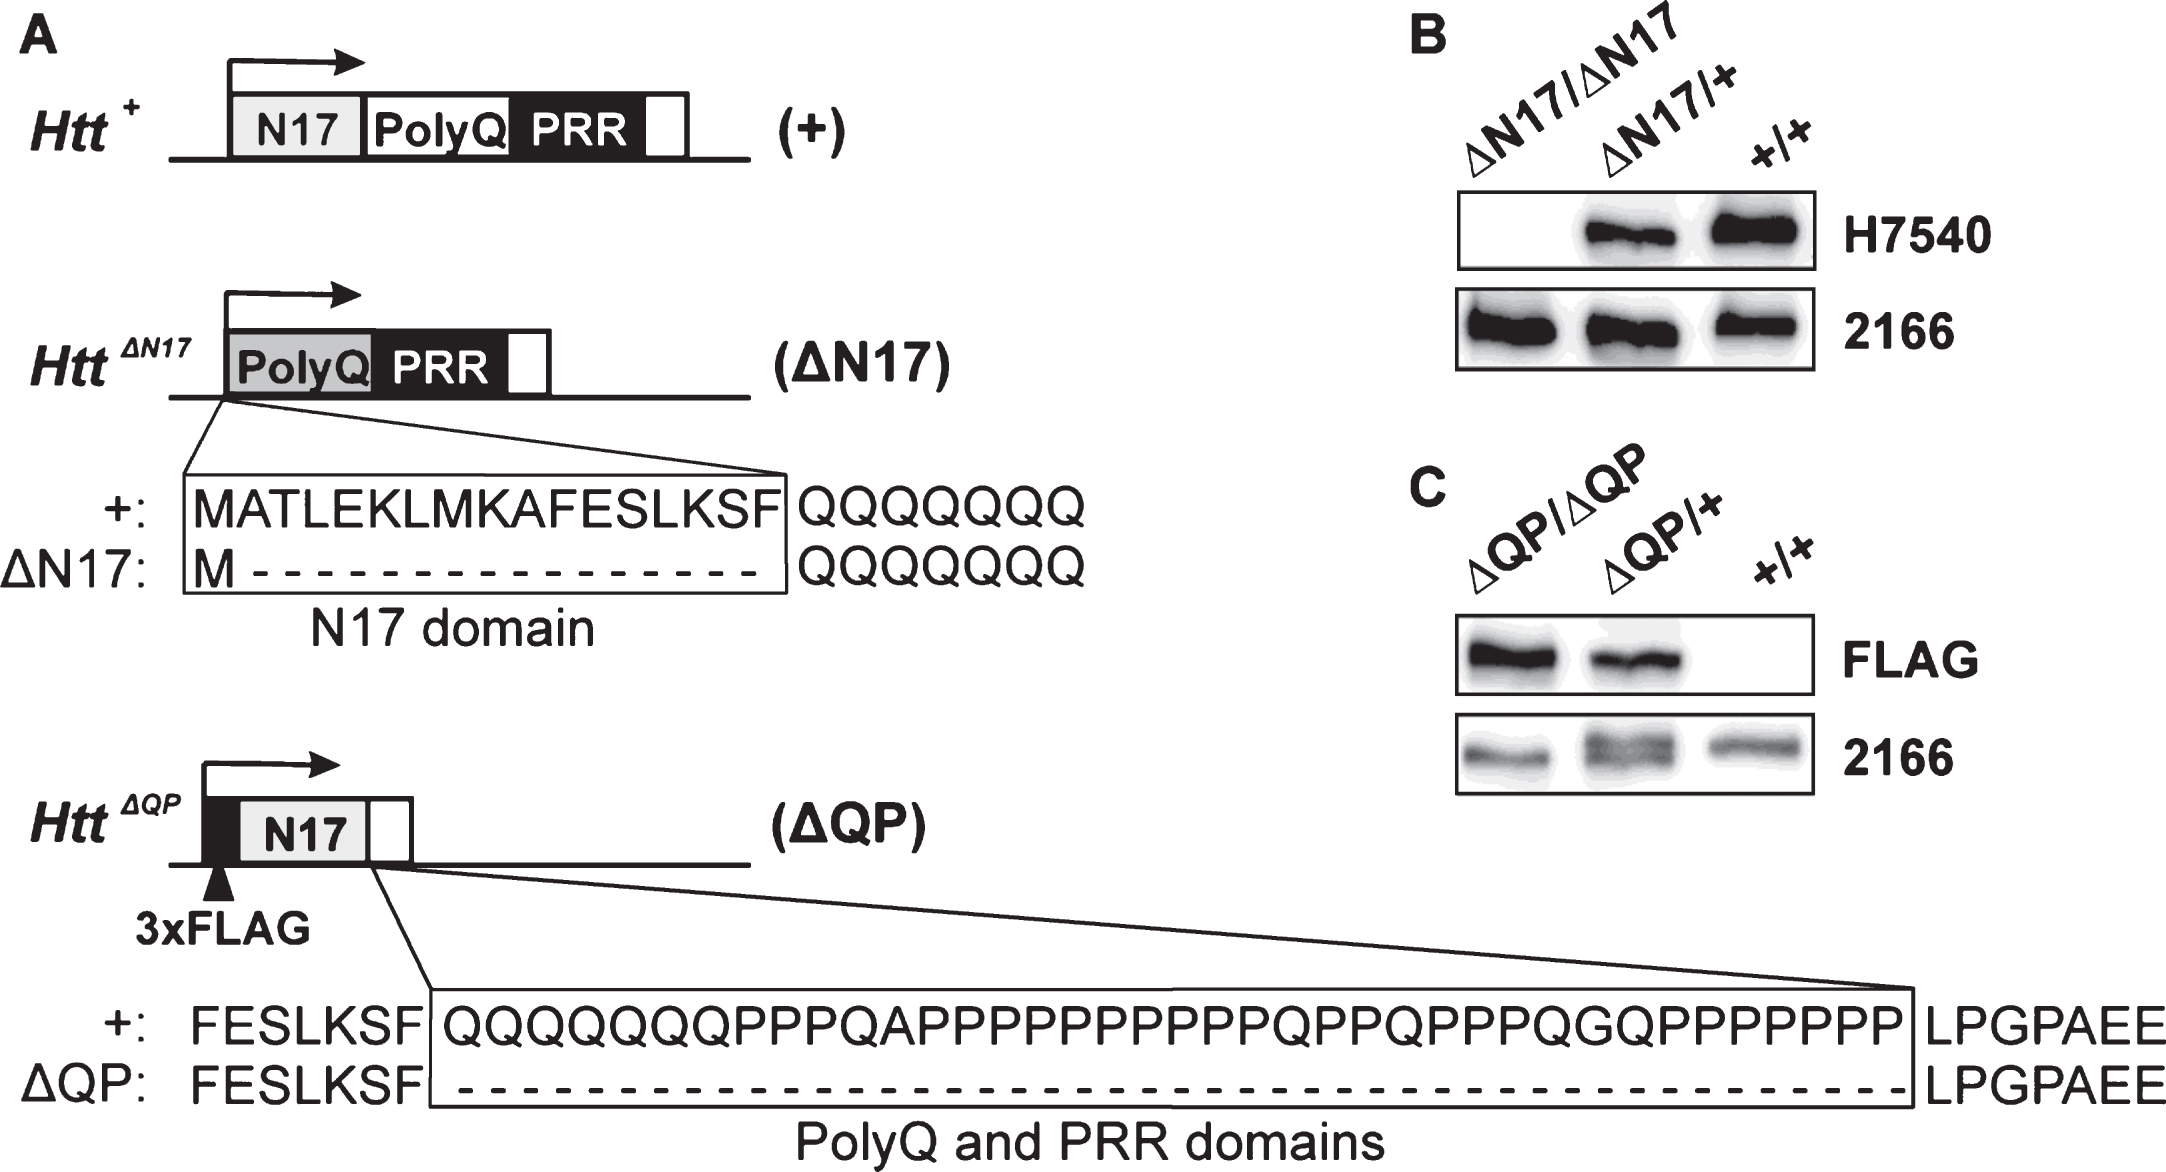 Htt N-terminal 
domain deletions. (A) Illustration of Htt exon 1 for wild type Htt+ (+), HttΔN17 (ΔN17), and HttΔQP (ΔQP) 
alleles. The N17 domain, polyQ stretch, and the mouse PRR are indicated. In the HttΔN17 allele, the first methionine was retained, while amino acids 2-17 were 
deleted. (B) Htt+/+ (+/+), HttΔN17/+ (ΔN17/+), and HttΔN17/ΔN17 (ΔN17/ΔN17) whole brain lysates 
probed with H7540 and MAB2166 antibodies. The N17-specific H7540 antibody detects wild type Htt in the+/+and ΔN17/+lane, but does not detect ΔN17-Htt in the ΔN17/ΔN17 lane, as expected. (C) Htt+/+ (+/+), HttΔQP/+ (ΔQP/+), and HttΔQP/ΔQP (ΔQP/ΔQP) lysates probed with FLAGM2 
and MAB2166 antibodies. FLAGM2 antibody detects the N-terminal 3xFLAG epitope tag of ΔQP-Htt in the ΔQP/+and ΔQP/ΔQP lanes. MAB2166 detects wild type Htt, ΔQP-Htt and ΔN17-Htt. 
Note that ΔQP-Htt migrates slightly faster on SDS-PAGE resulting in an Htt doublet in the ΔQP/+lane.